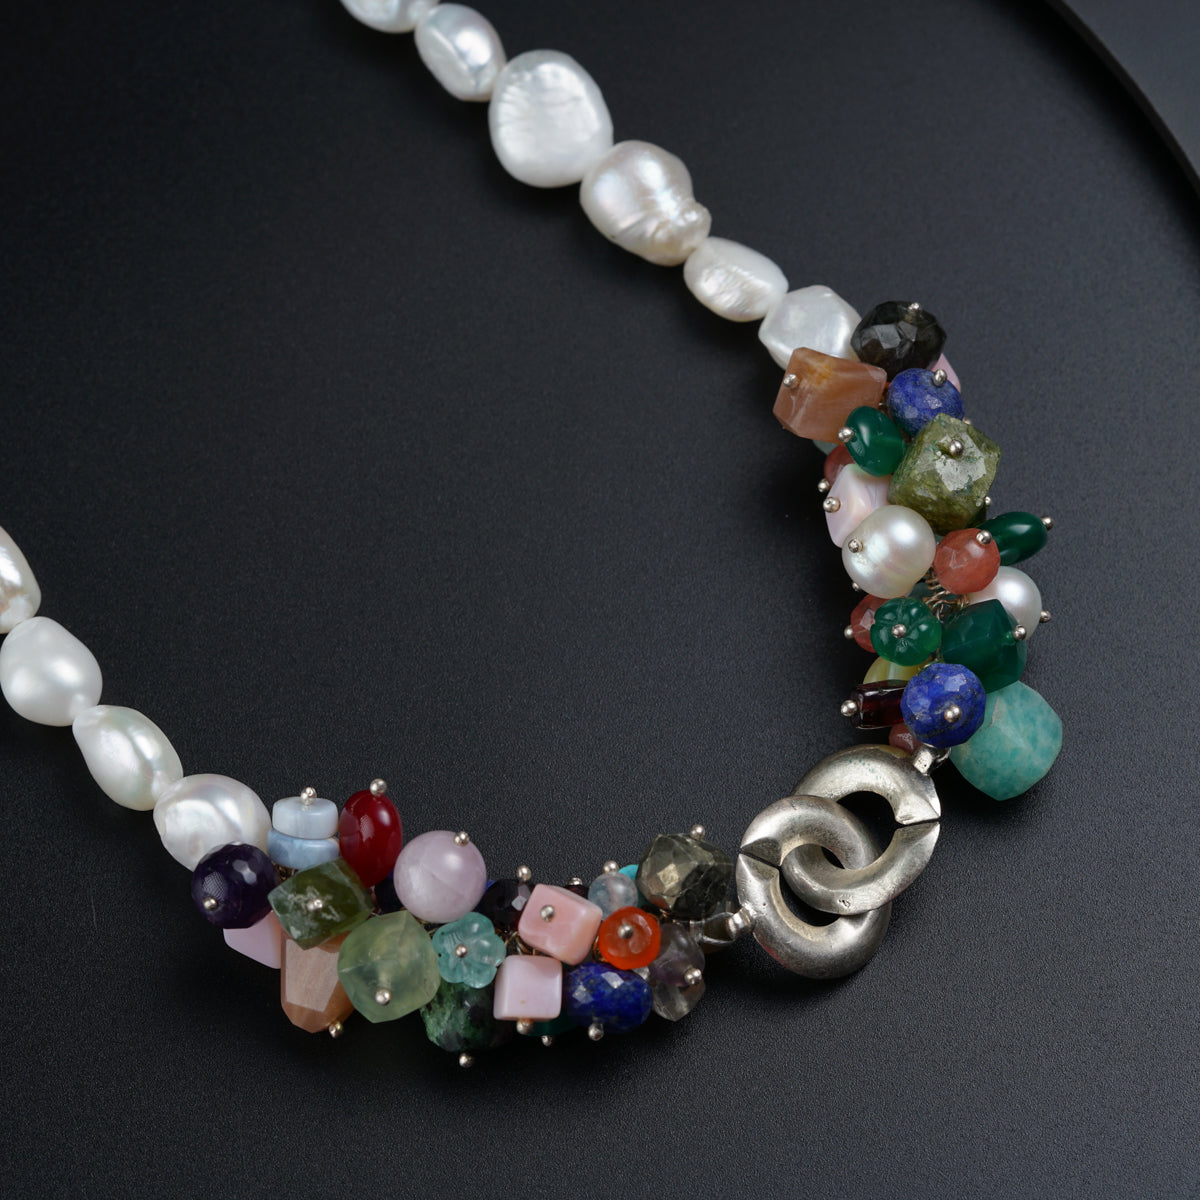 a multi - colored beaded necklace on a black surface